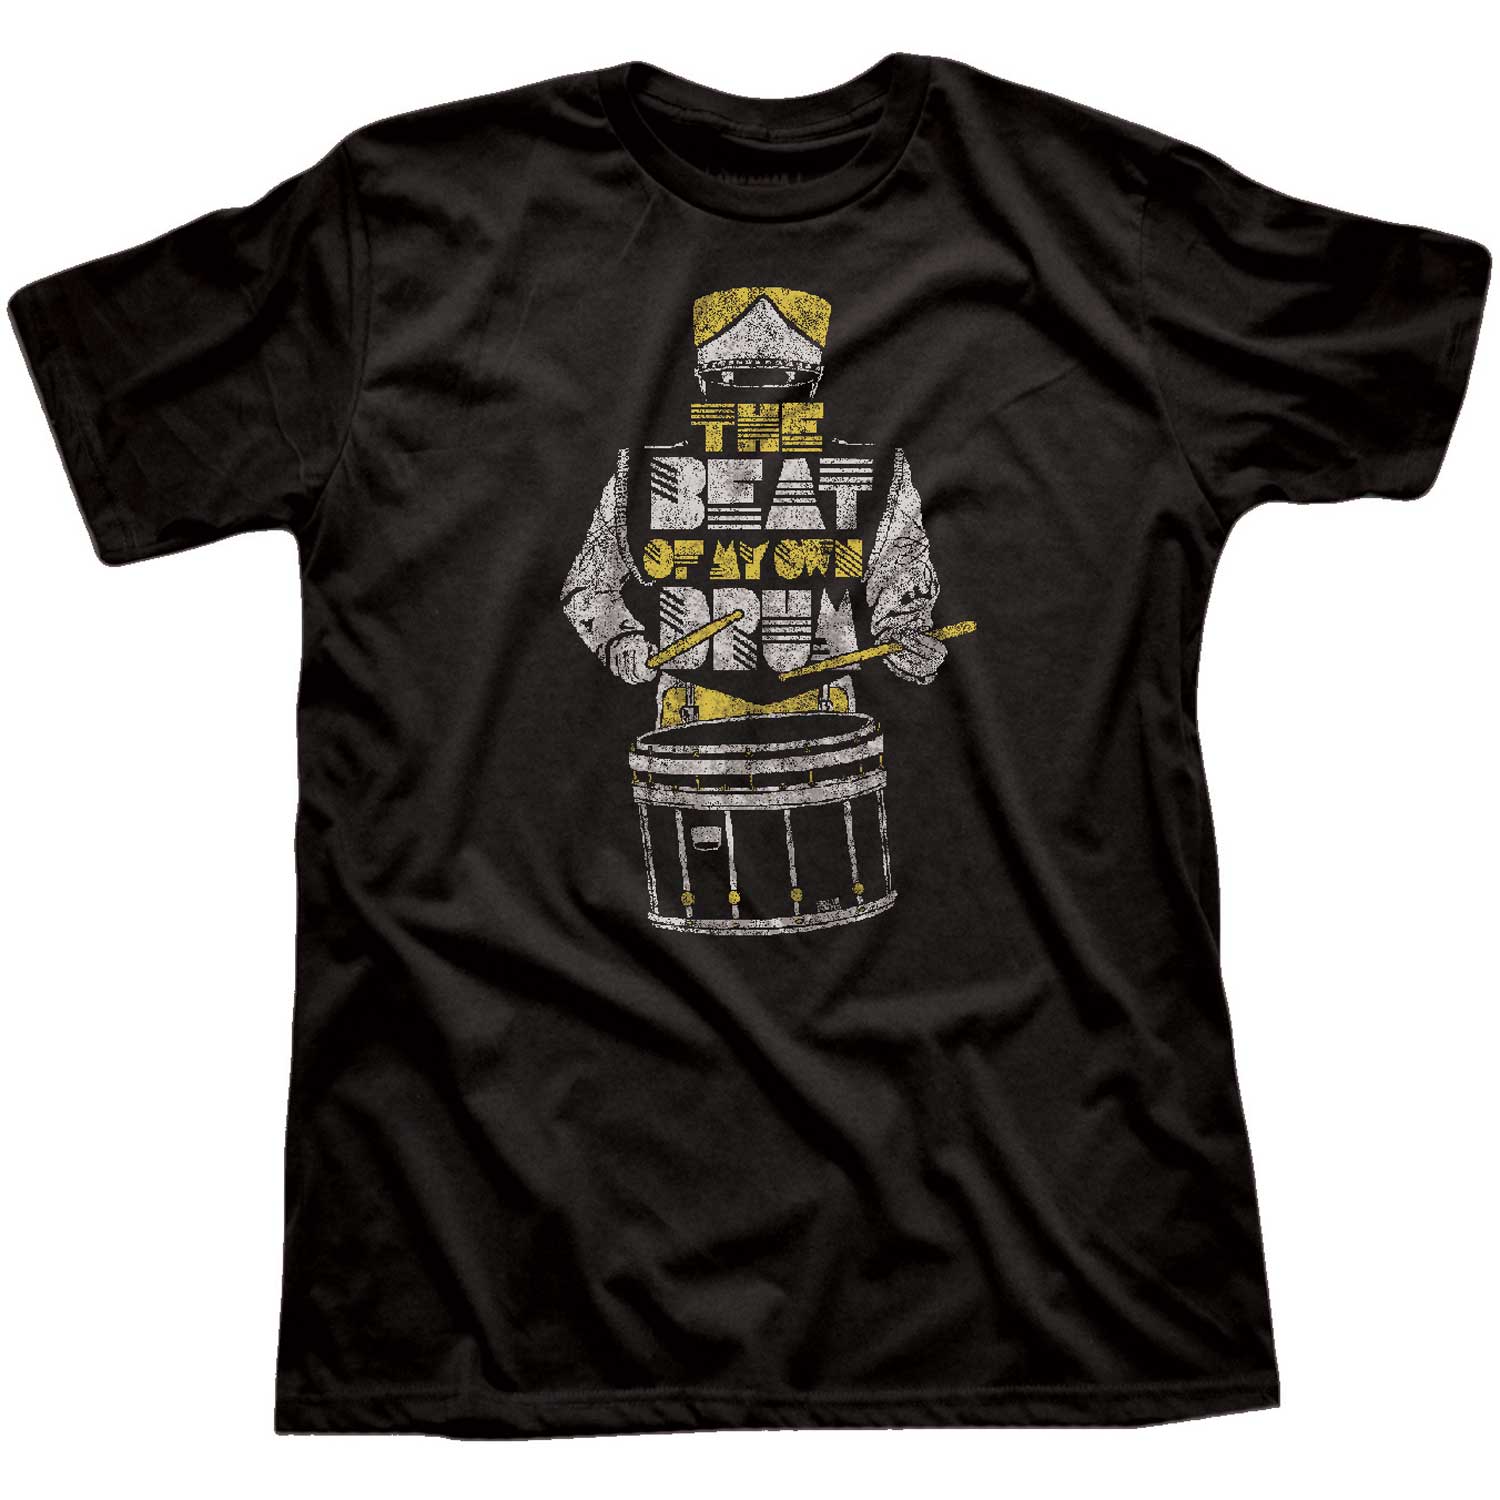 Men's The Beat Of My Own Drum Cool Graphic T-Shirt | Vintage Marching Band Tee | Solid Threads